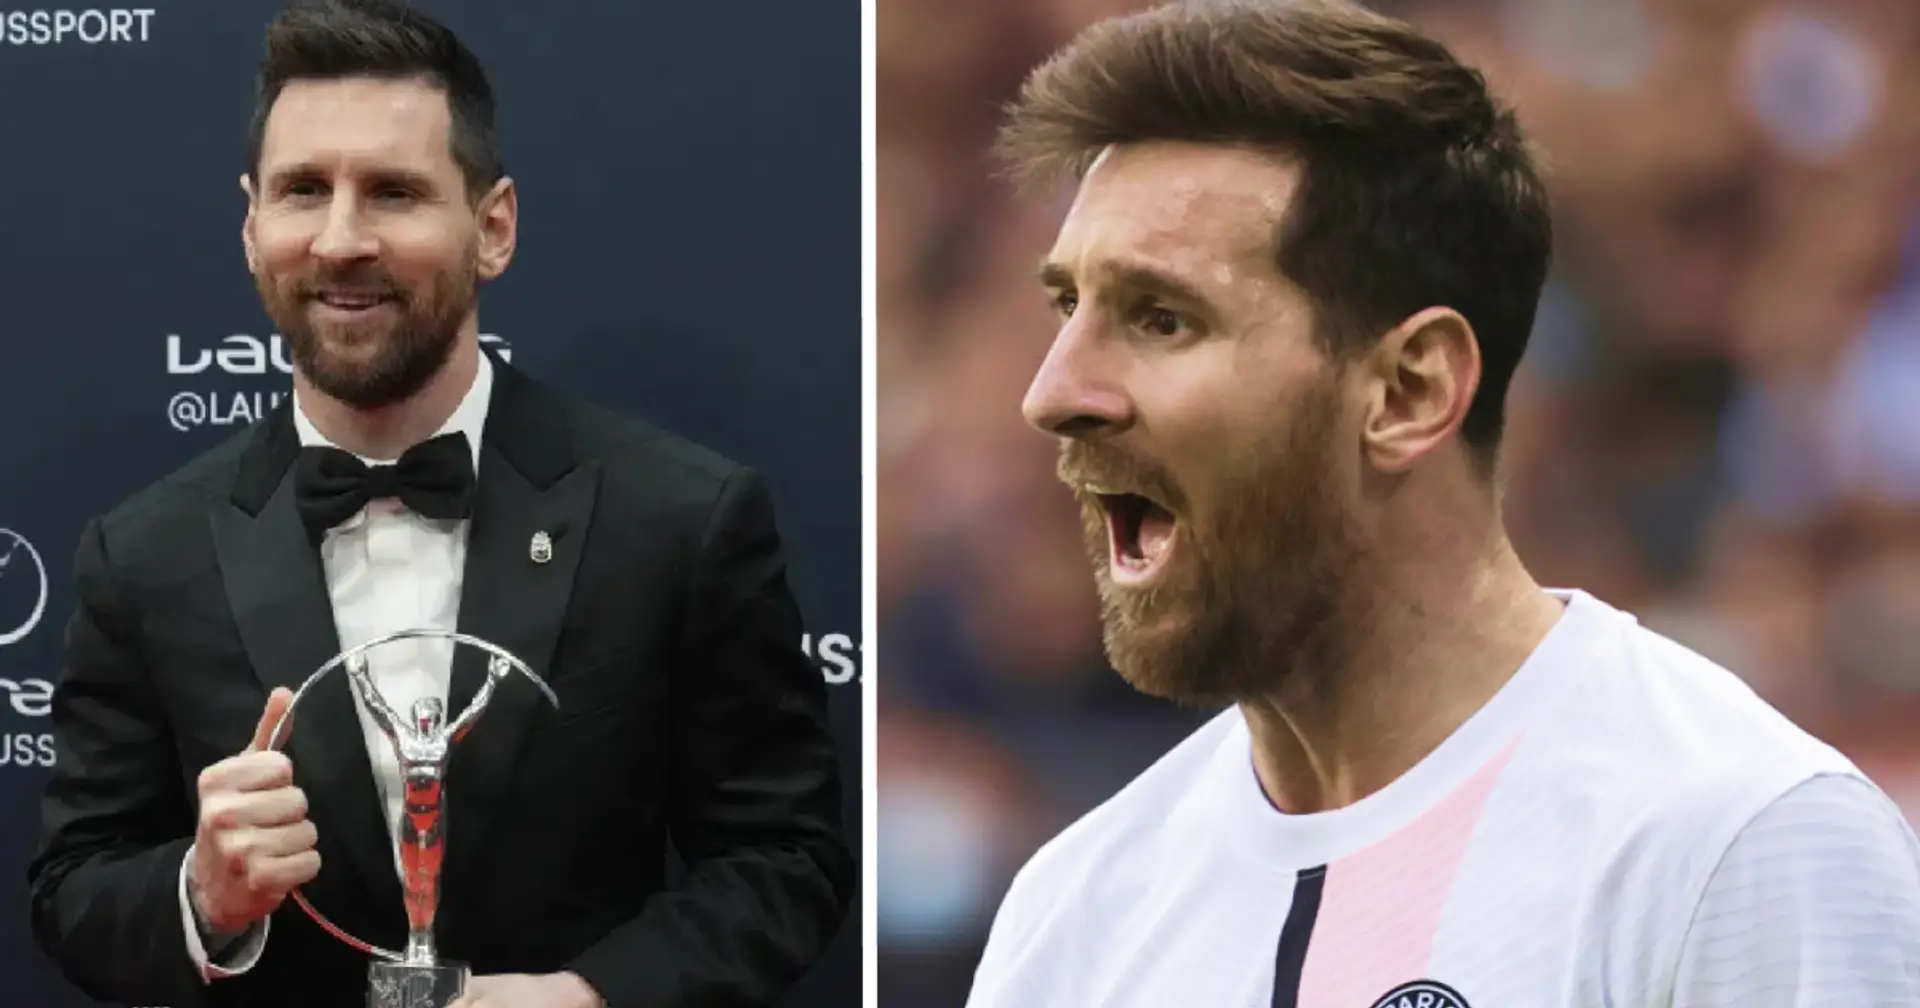 Leo Messi wins one last trophy for PSG even after leaving the club